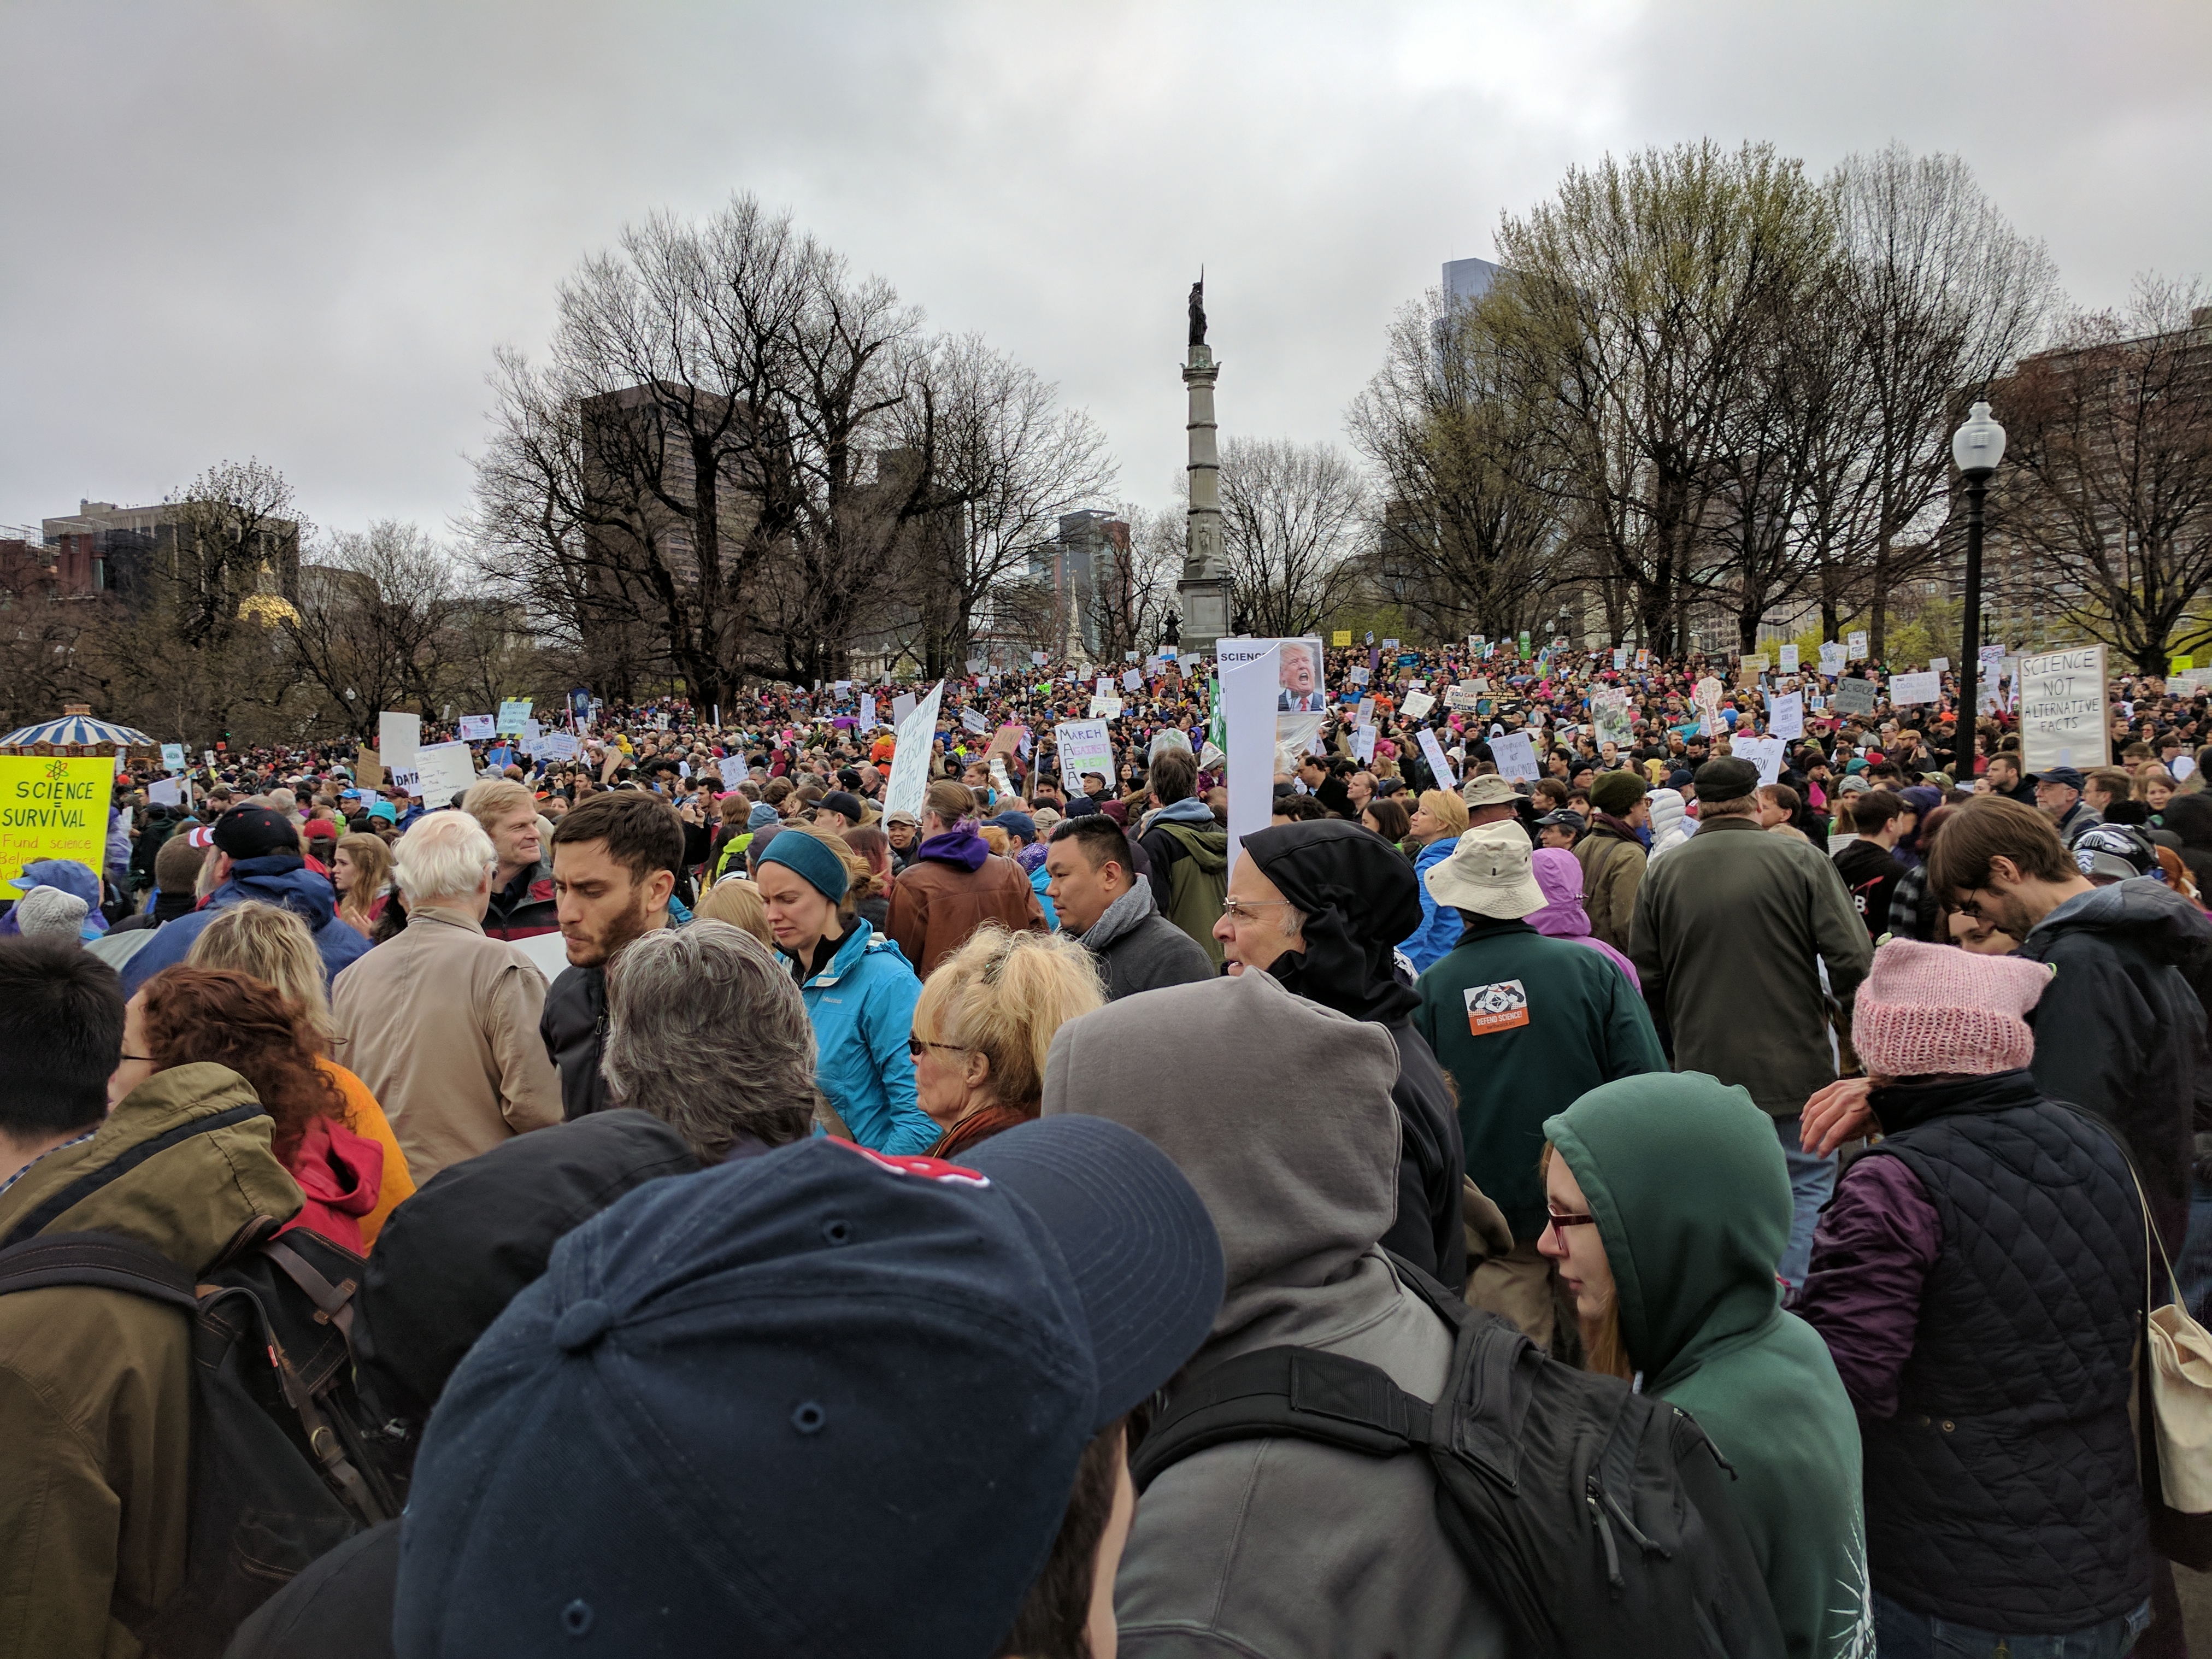 HMS marchers joined thousands at the Boston Common for the main event. Image: Kevin Jiang